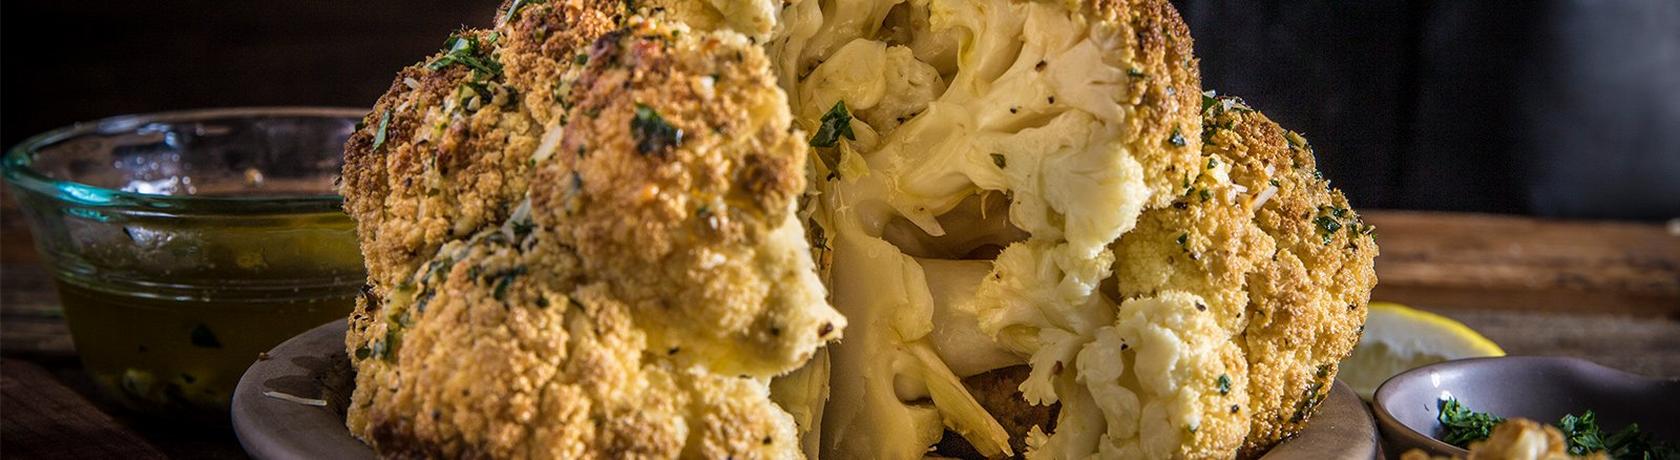 Whole Roasted Cauliflower With Garlic Parmesan Butter